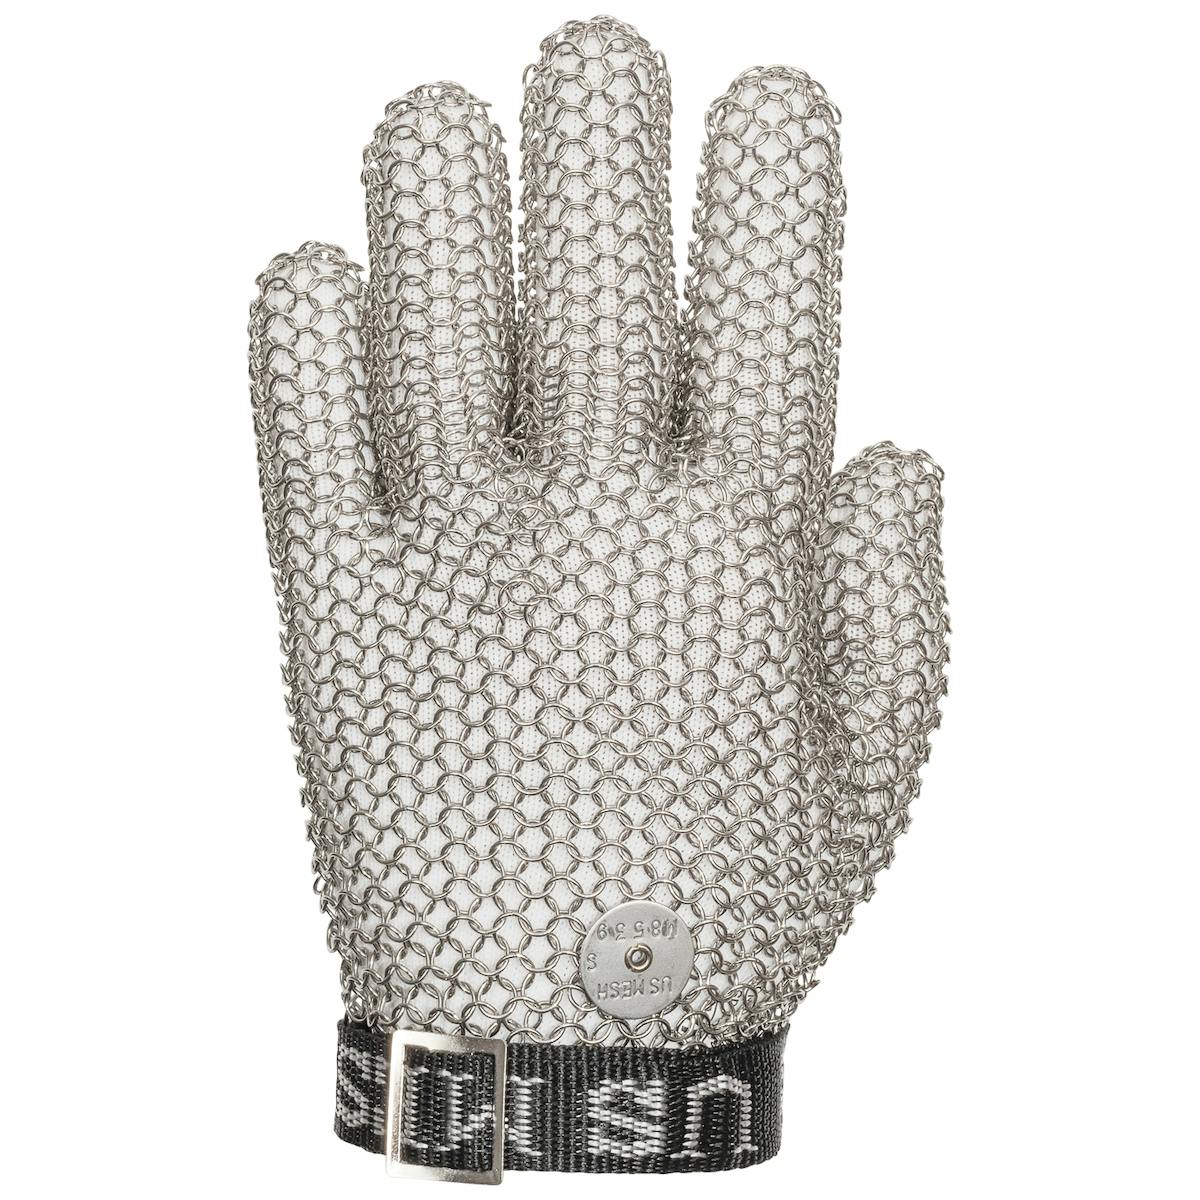 US Mesh® Large Ring Stainless Steel Mesh Glove with Adjustable Strap - Wrist Length (USM-1190)